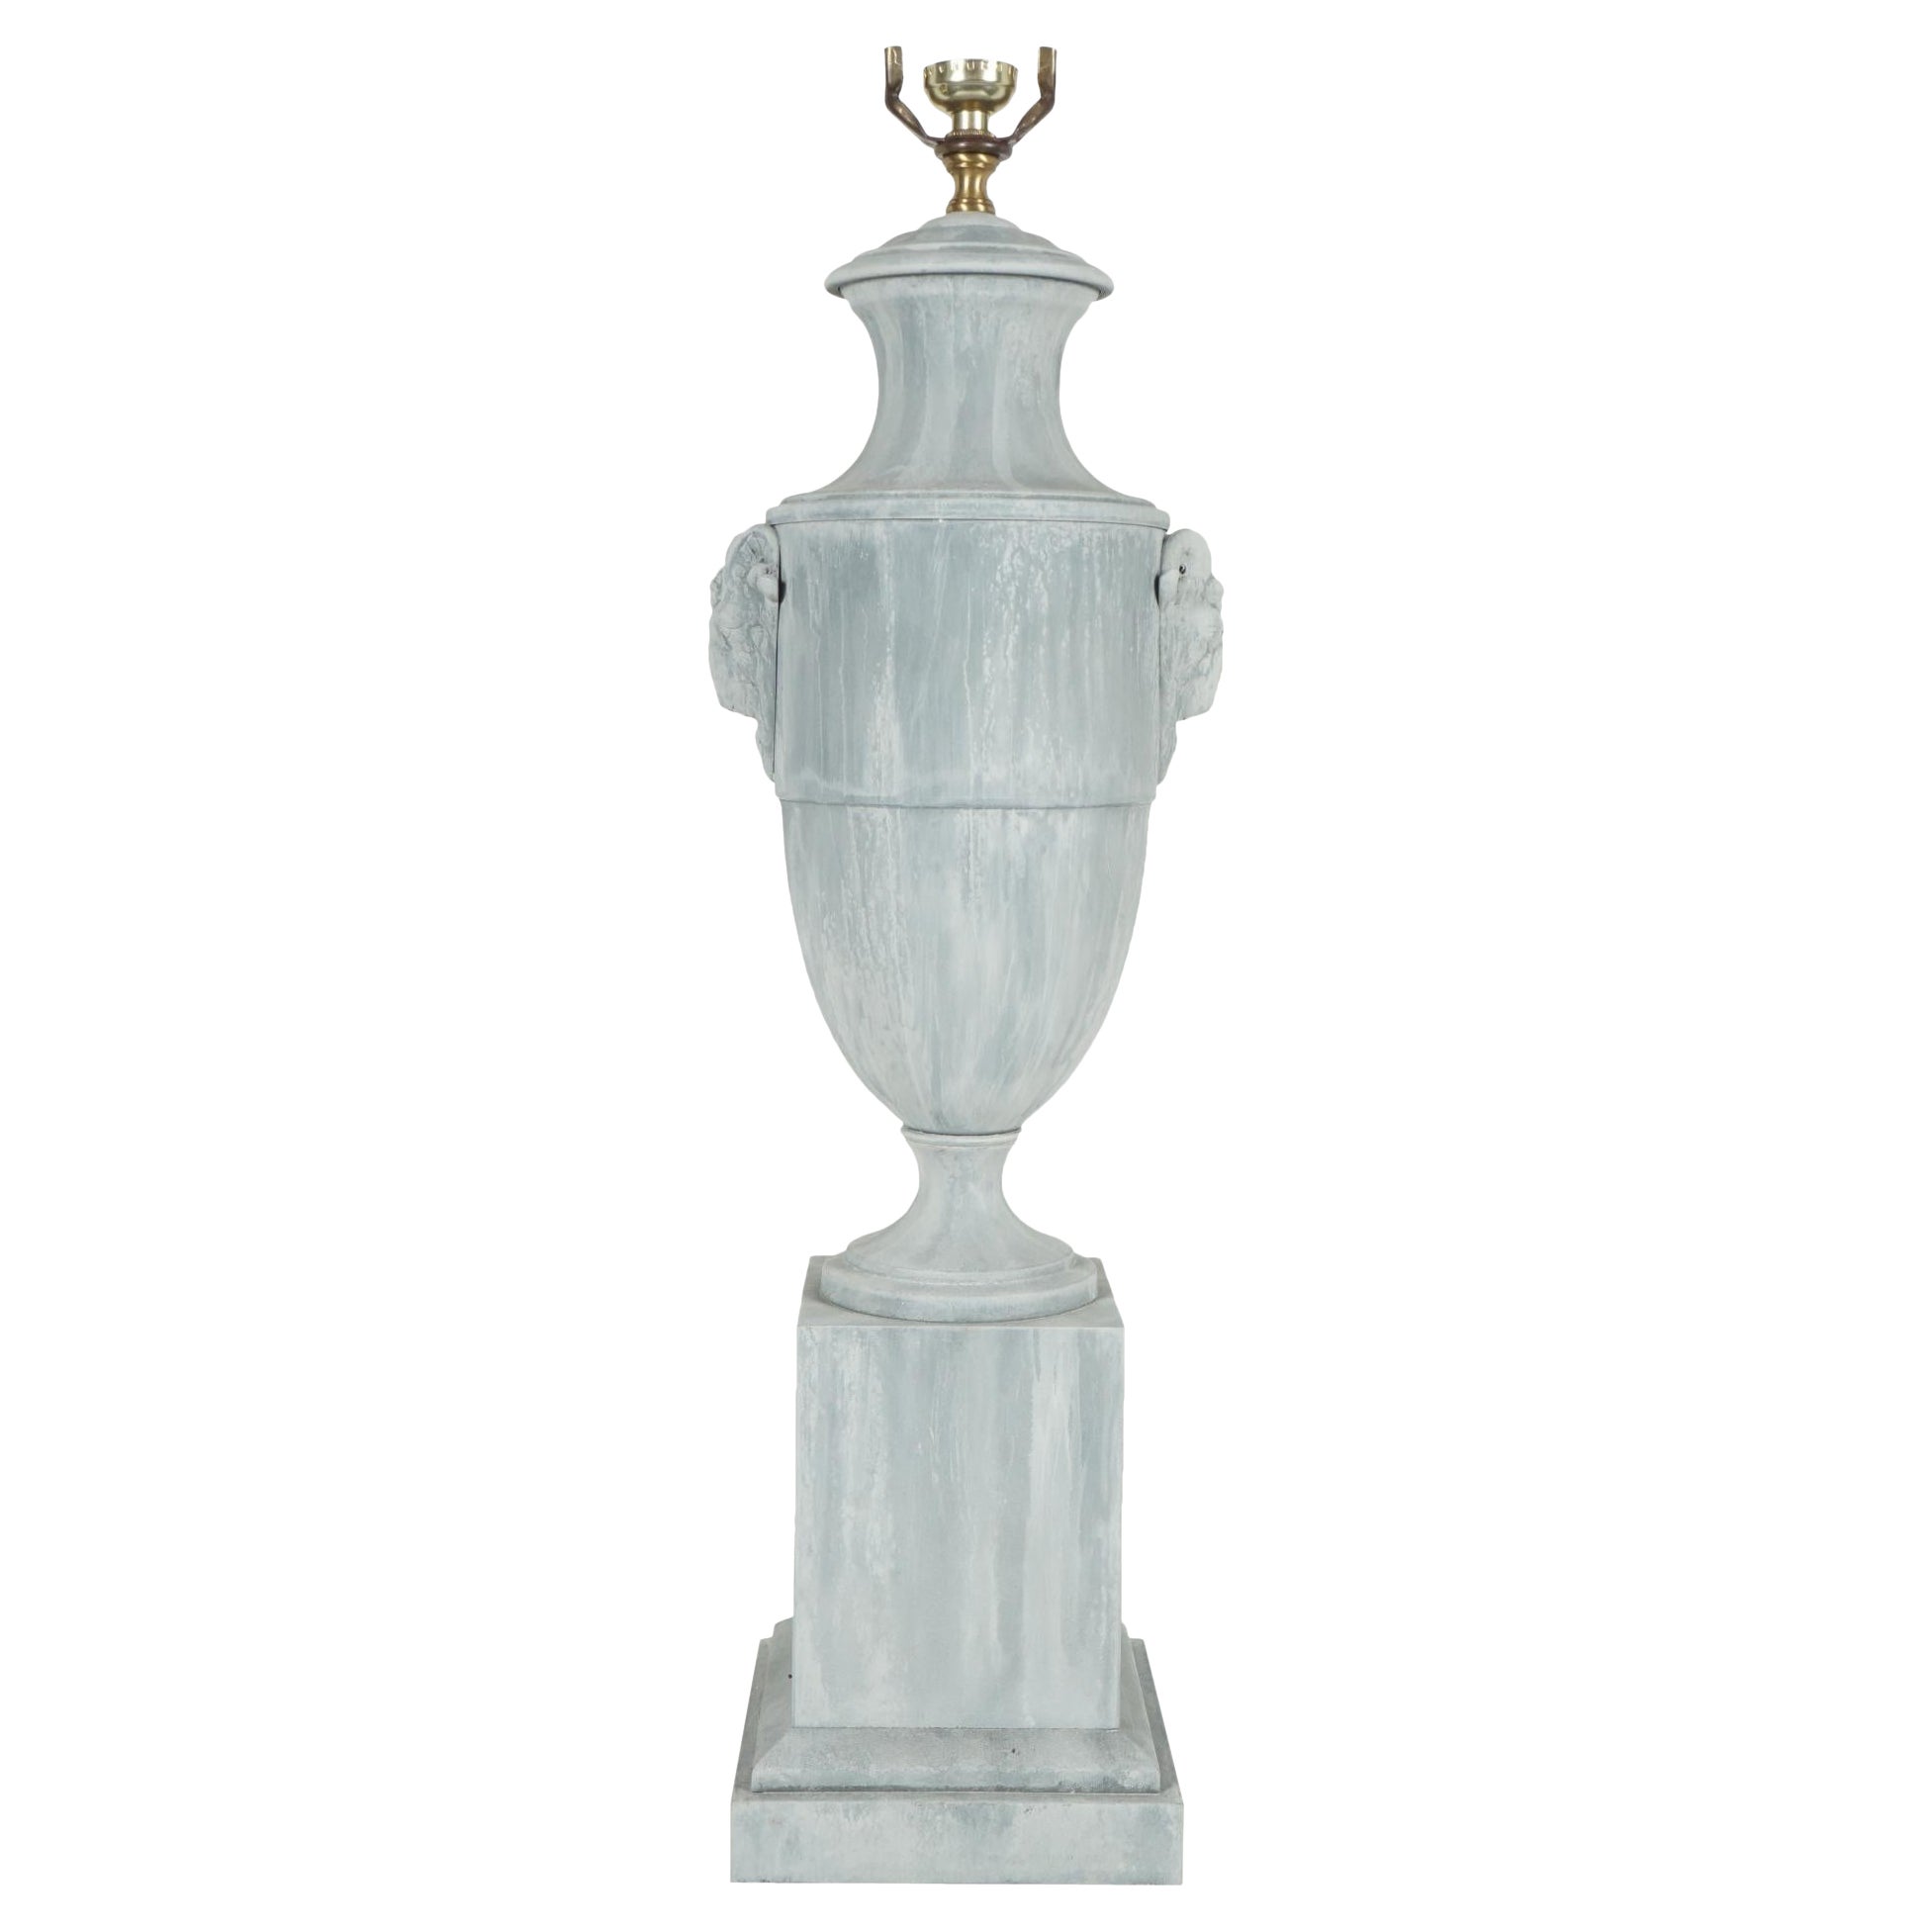 Early 20th Century French Zinc Urn Lamp from the Estate of Bunny Mellon For Sale